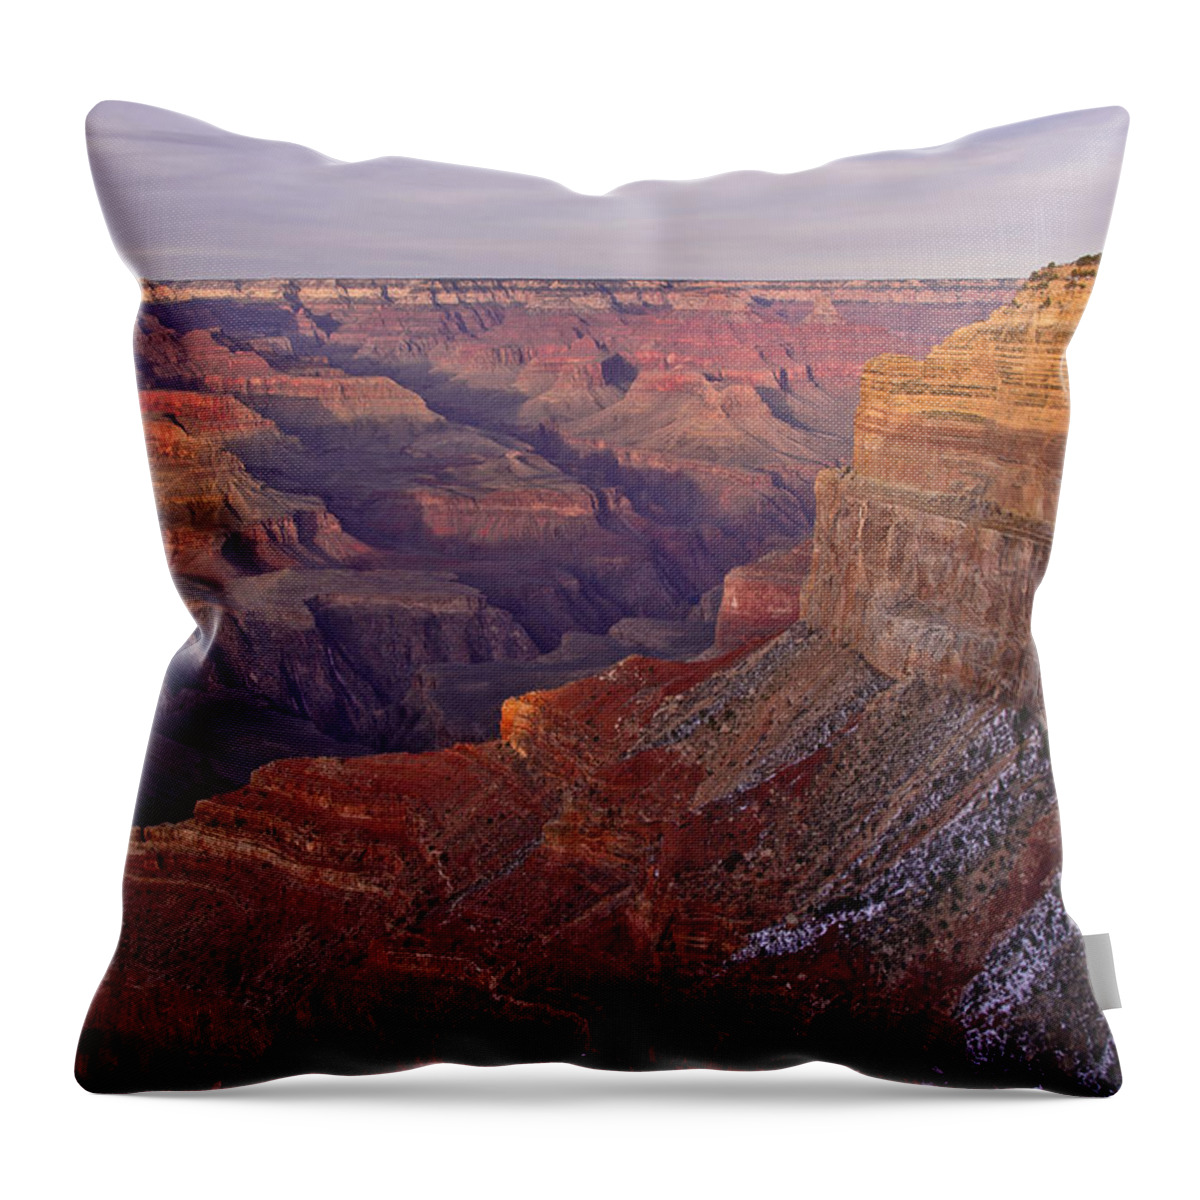 Grand Canyon Throw Pillow featuring the photograph Yavapai Point Grand Canyon by Lawrence Knutsson